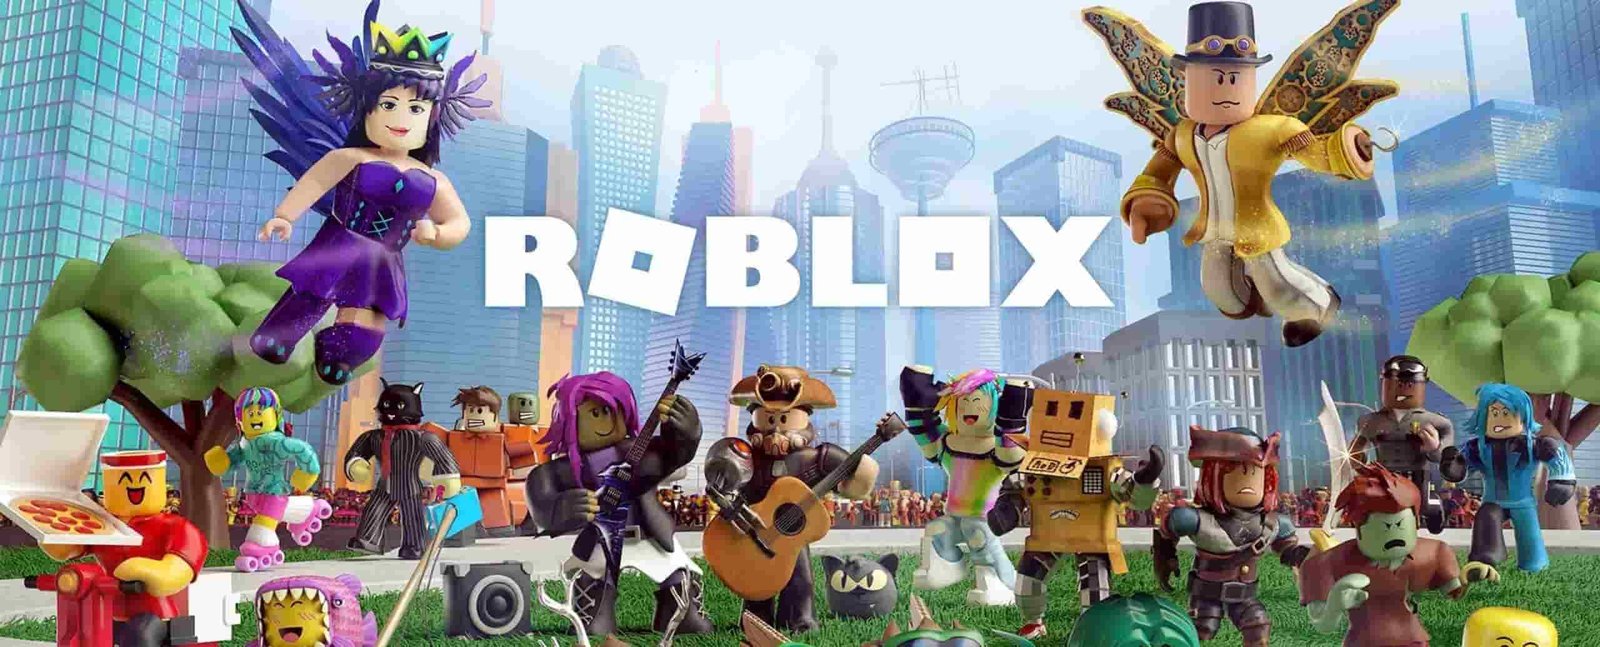 Roblox Voice Chat Feature Might Only Work For 18 Users Suggests Code Digistatement - 18 only roblox games